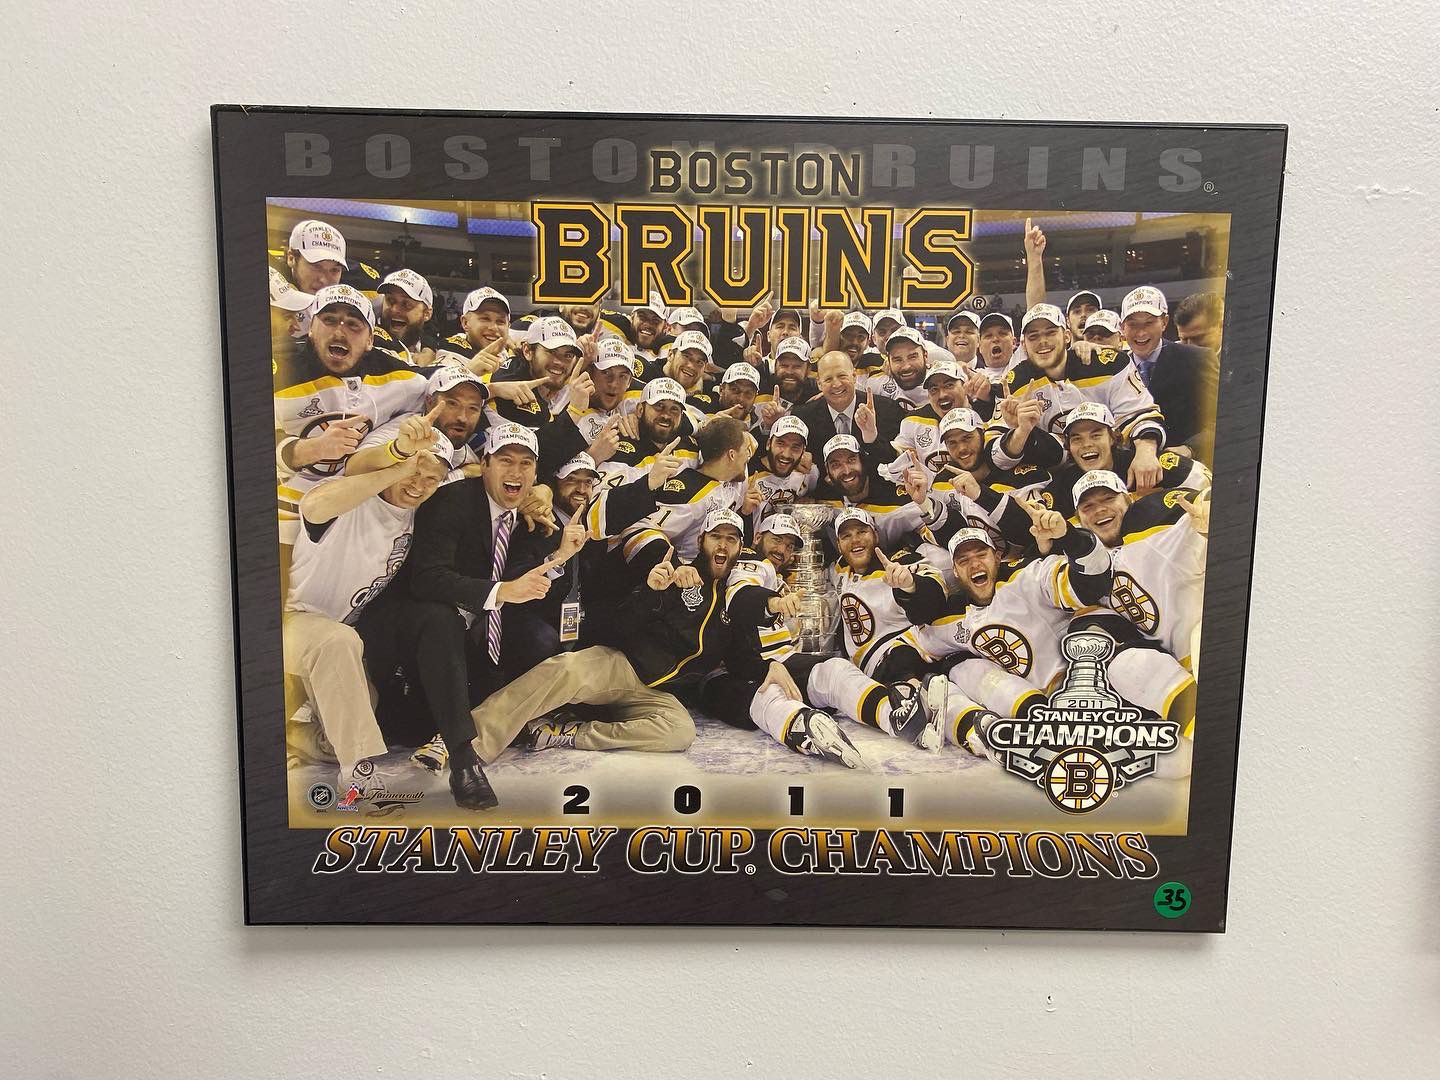 Boston Bruins 2011 Stanley Cup Champions Plaque $35